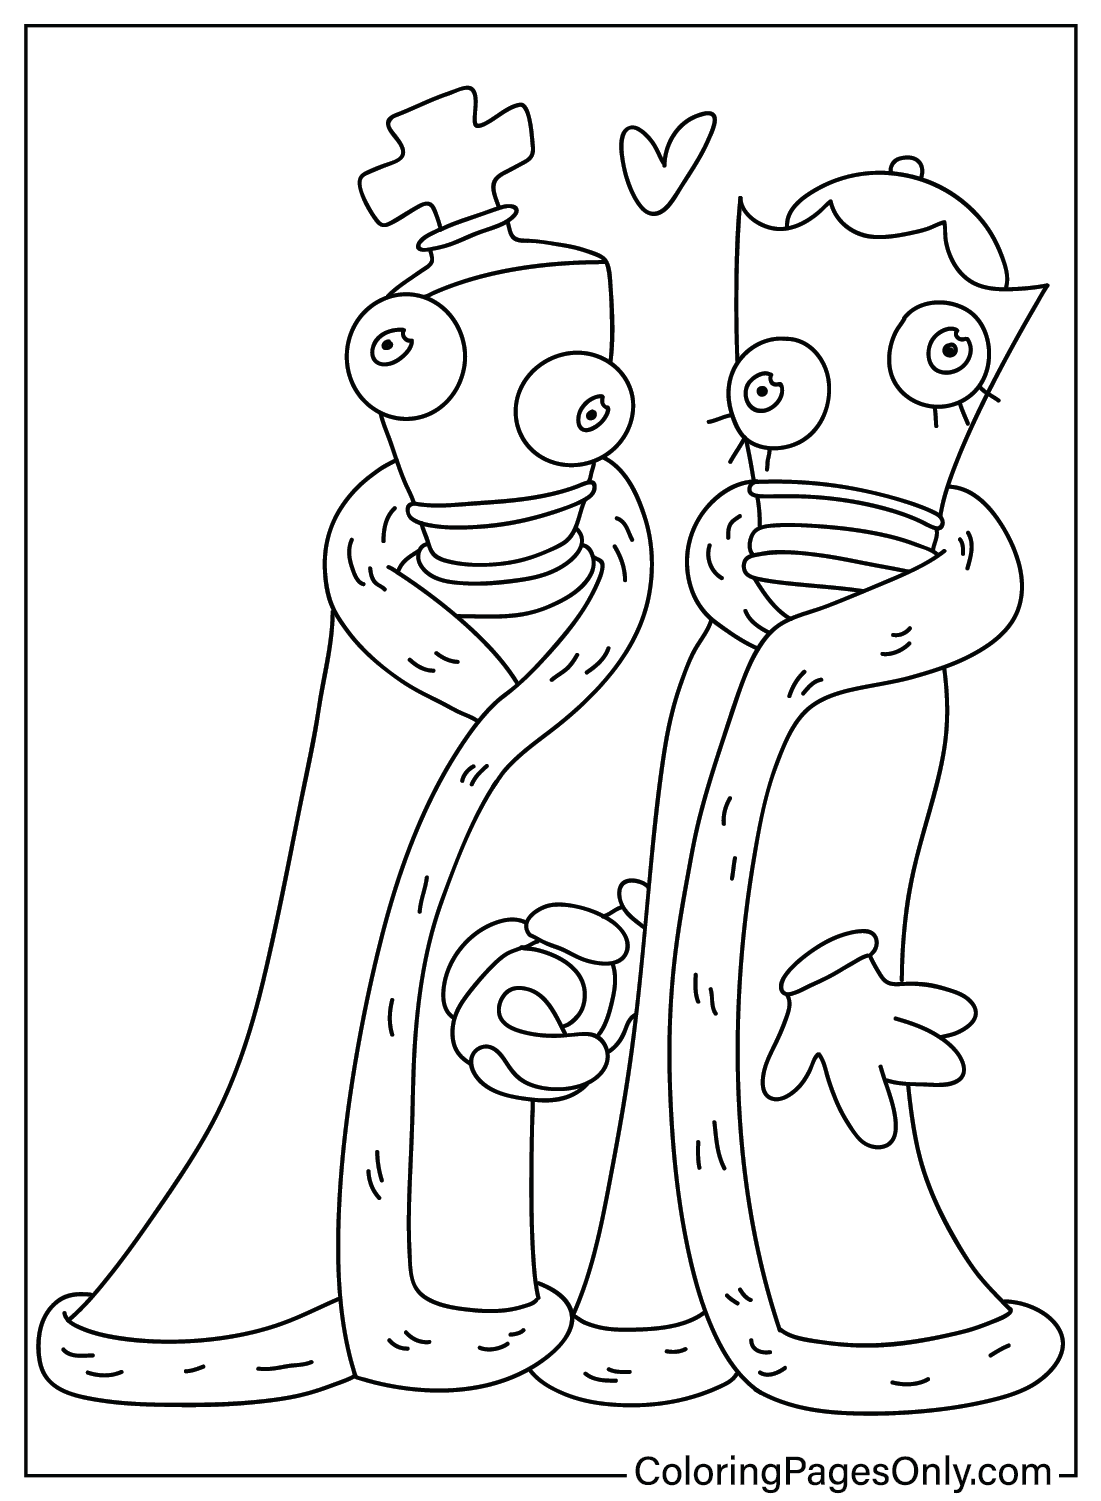 Kinger and Queener QuColoring Page from Kinger